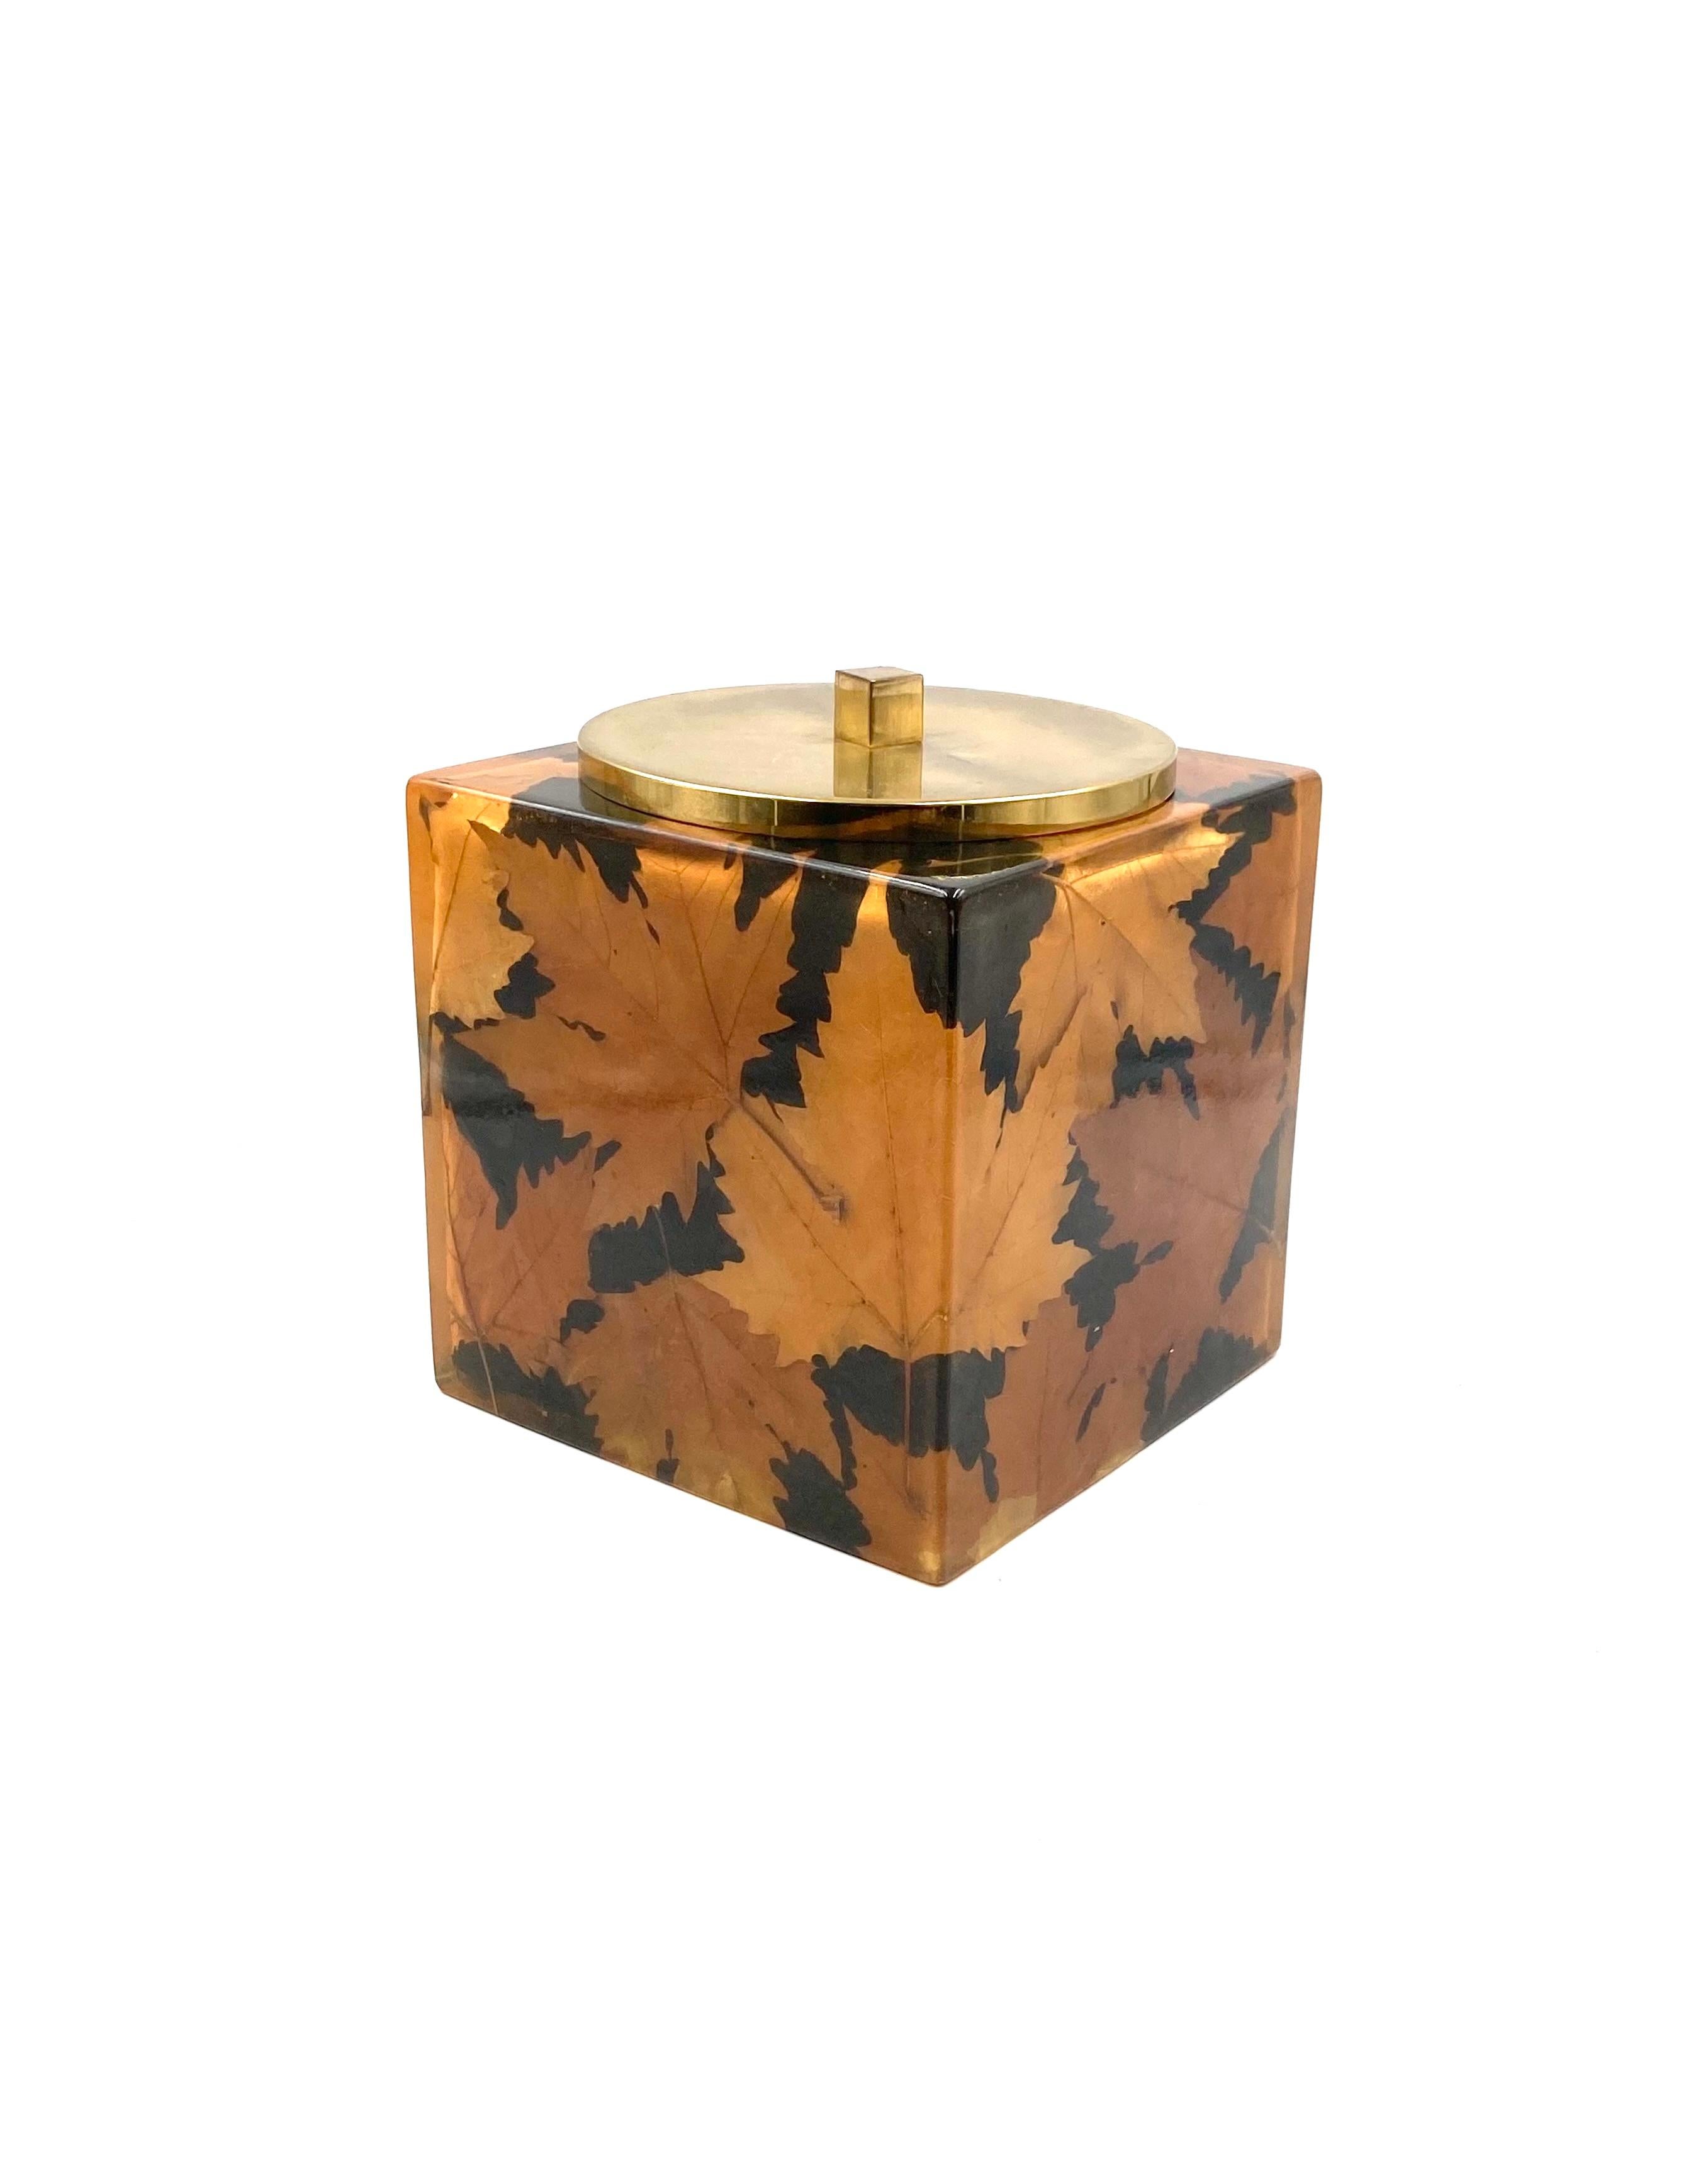 Hollywood regency brass and leaves resin ice bucket, Montagnani Florence 1970s For Sale 9